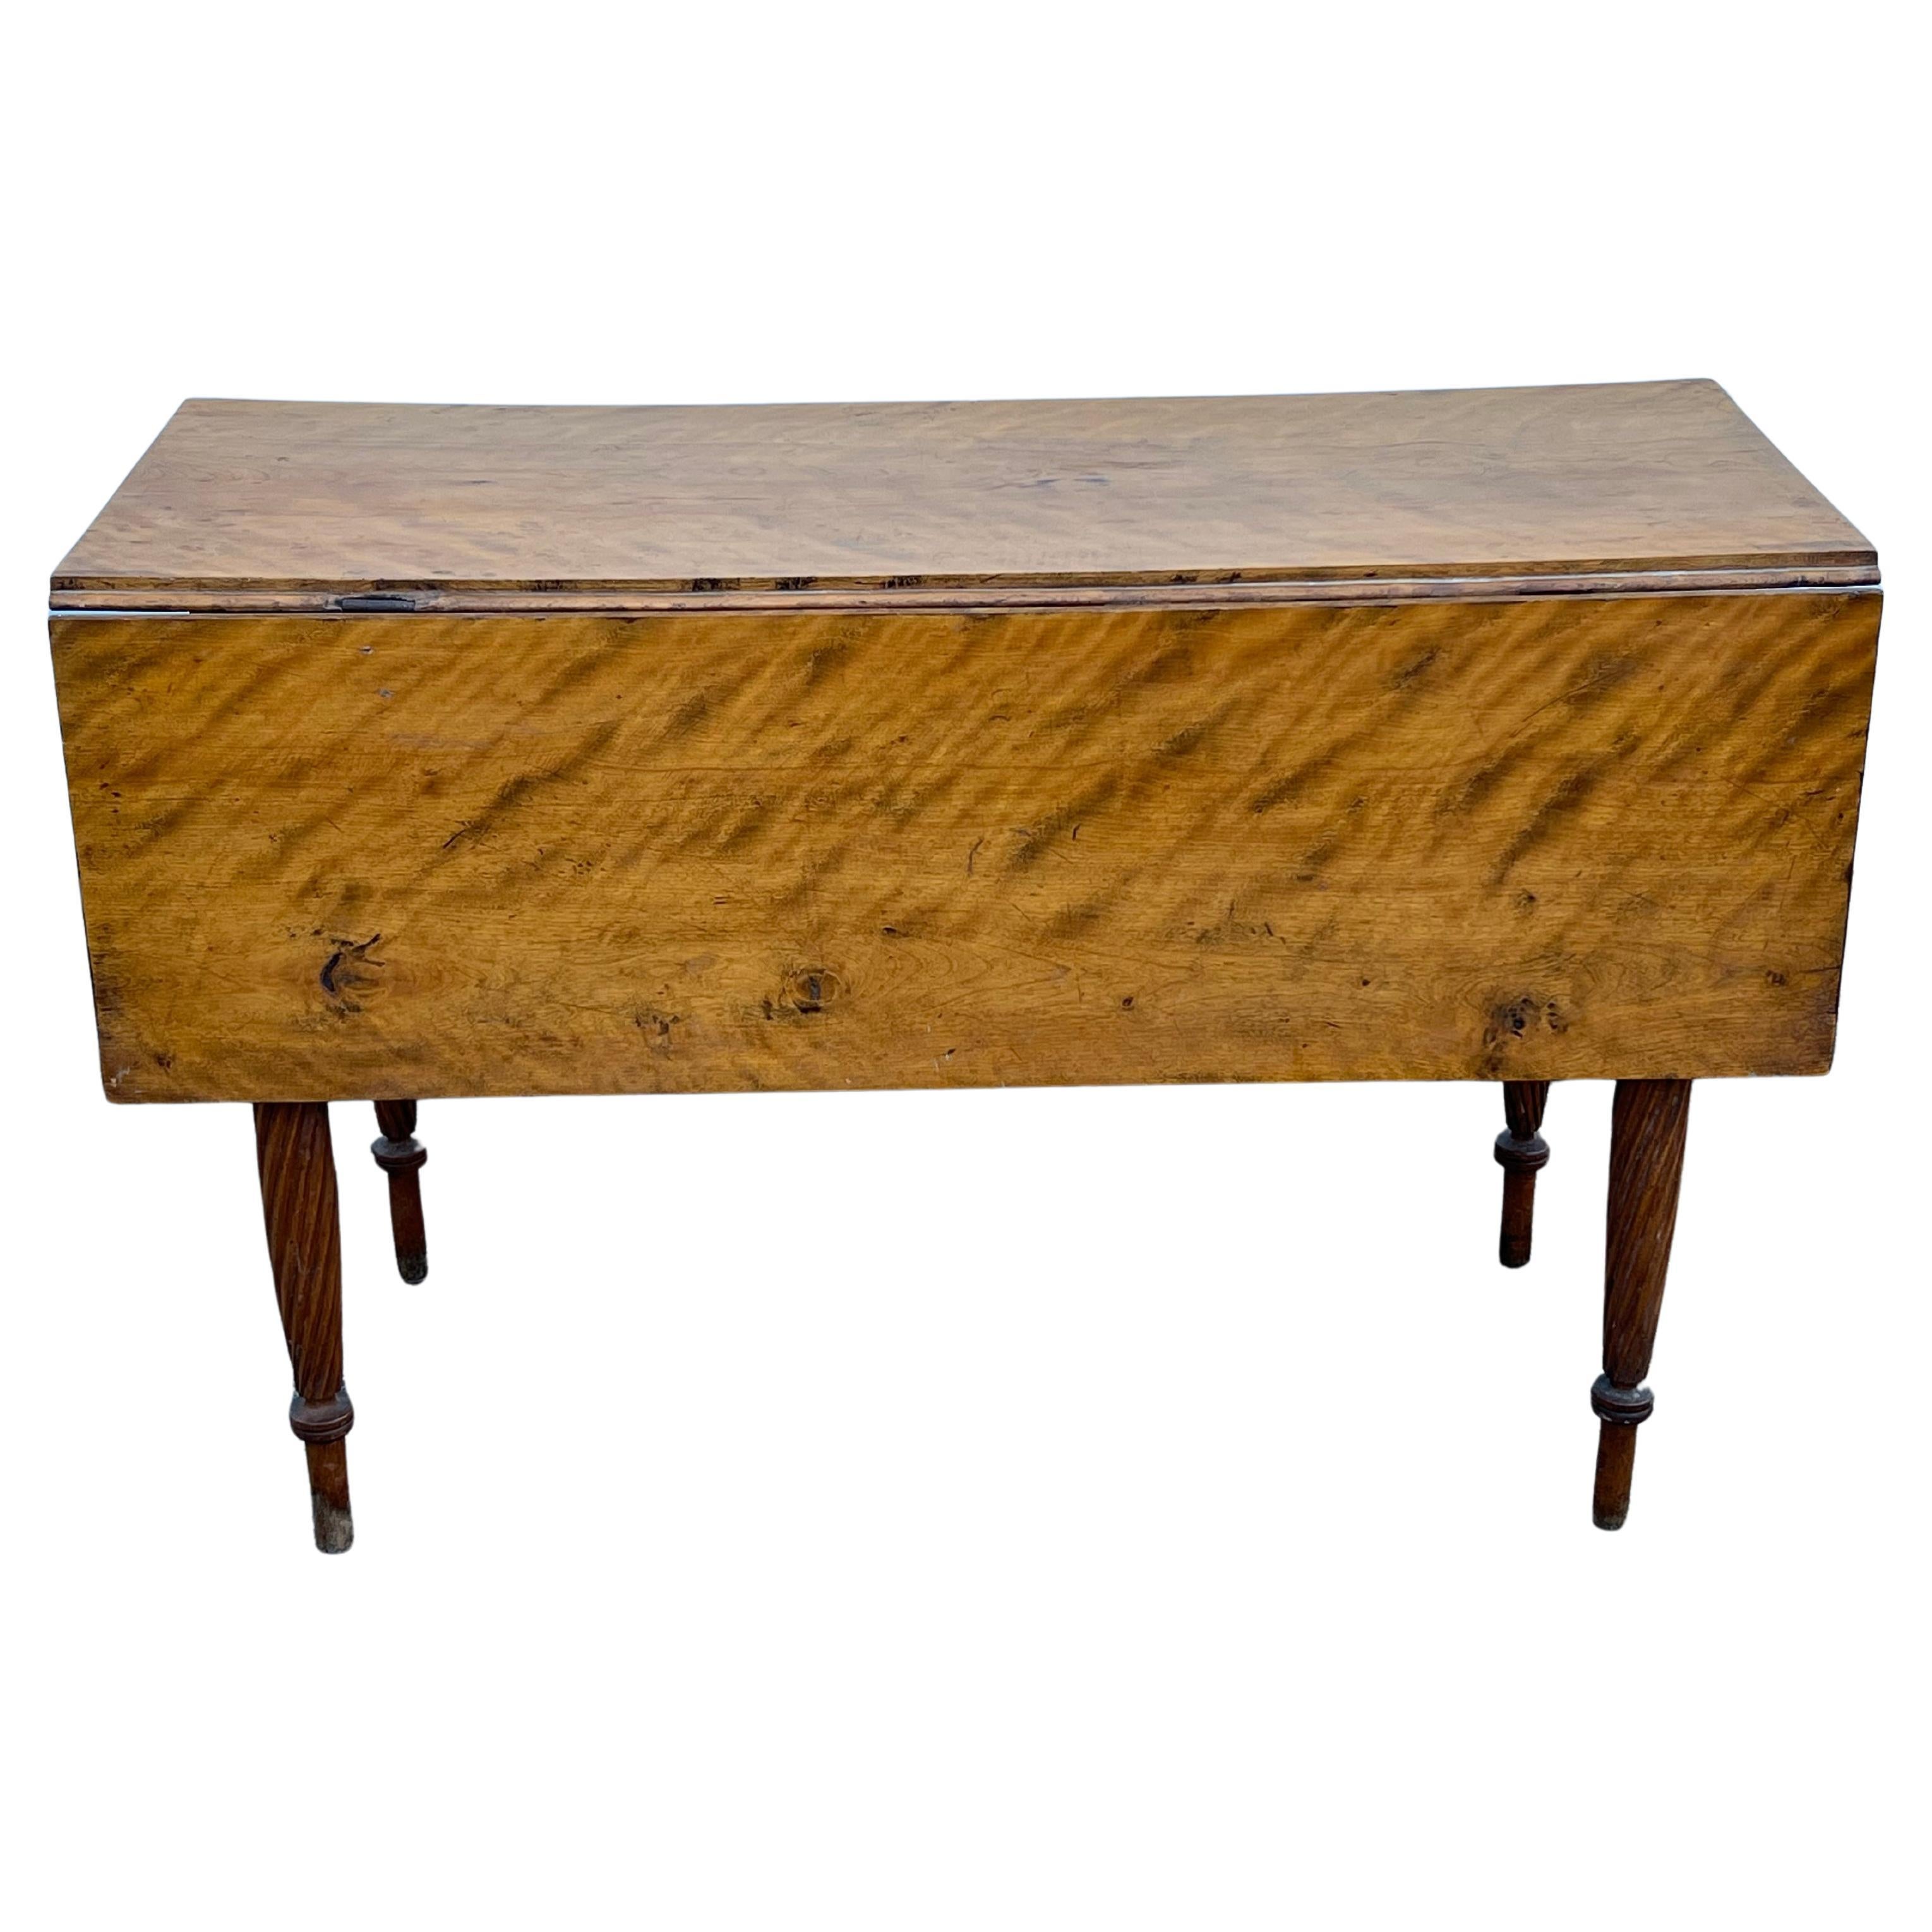 19th Century Flame Birch Drop Leaf Table with Spiral Carved Legs